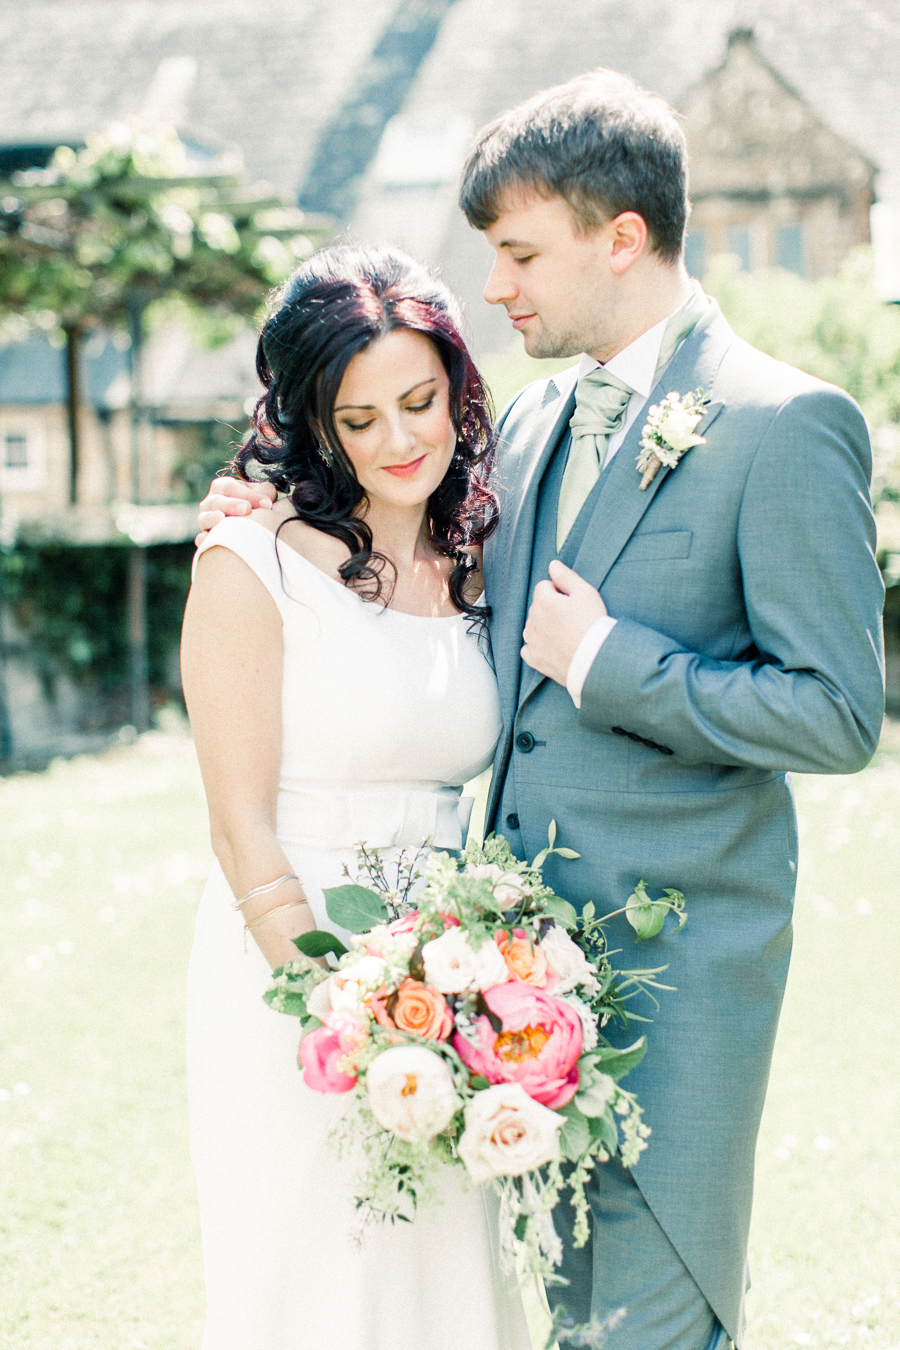 Jordans Courtyard rustic wedding styling ideas with images by Liz Baker Photography (31)